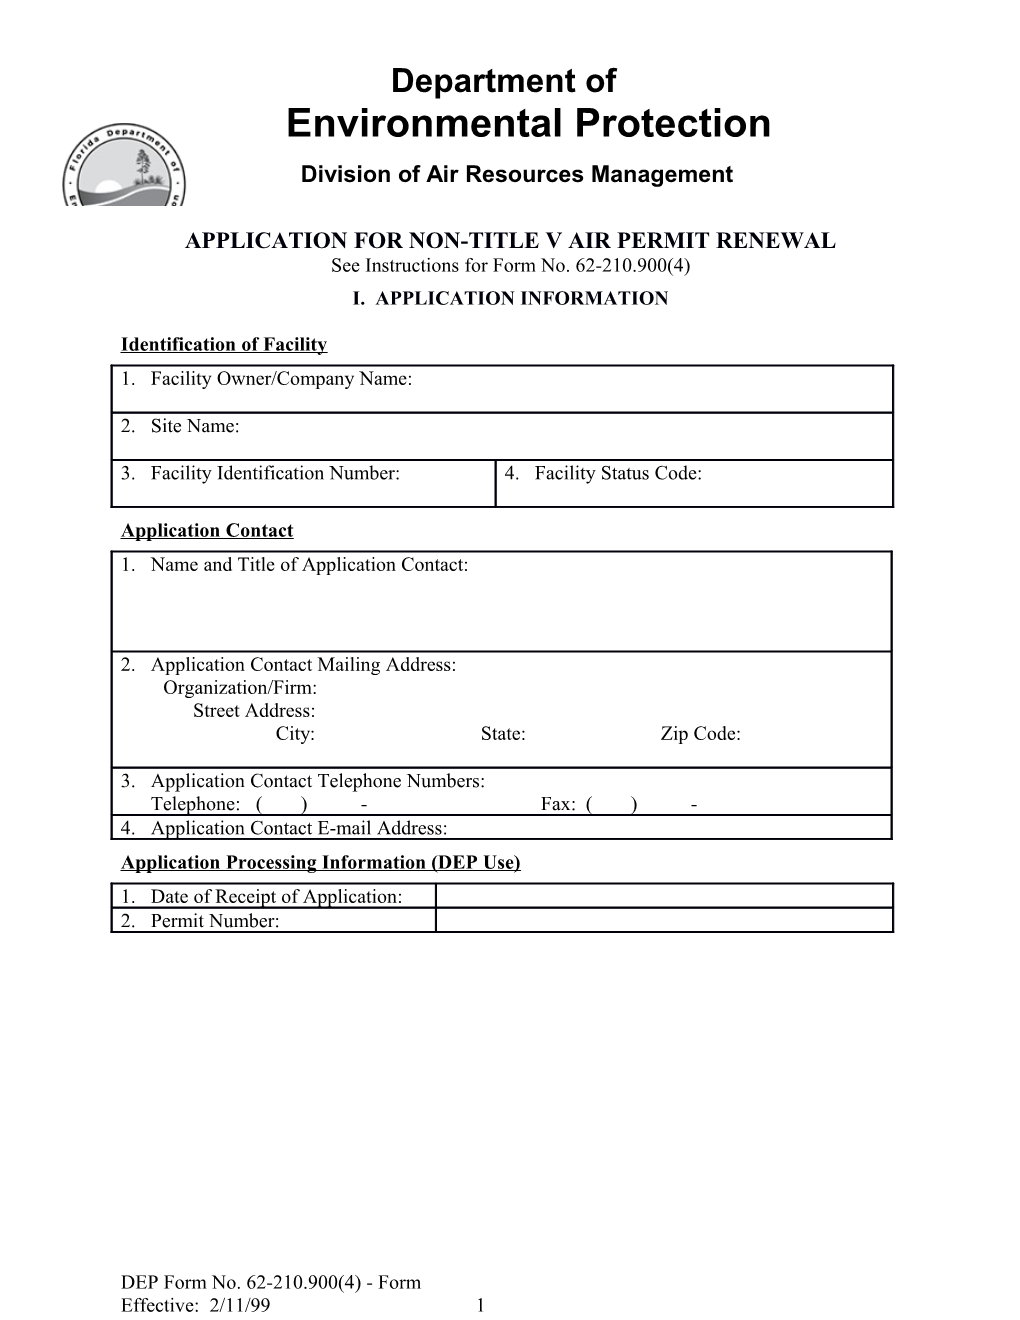 Application for Non-Title V Air Permit Renewal